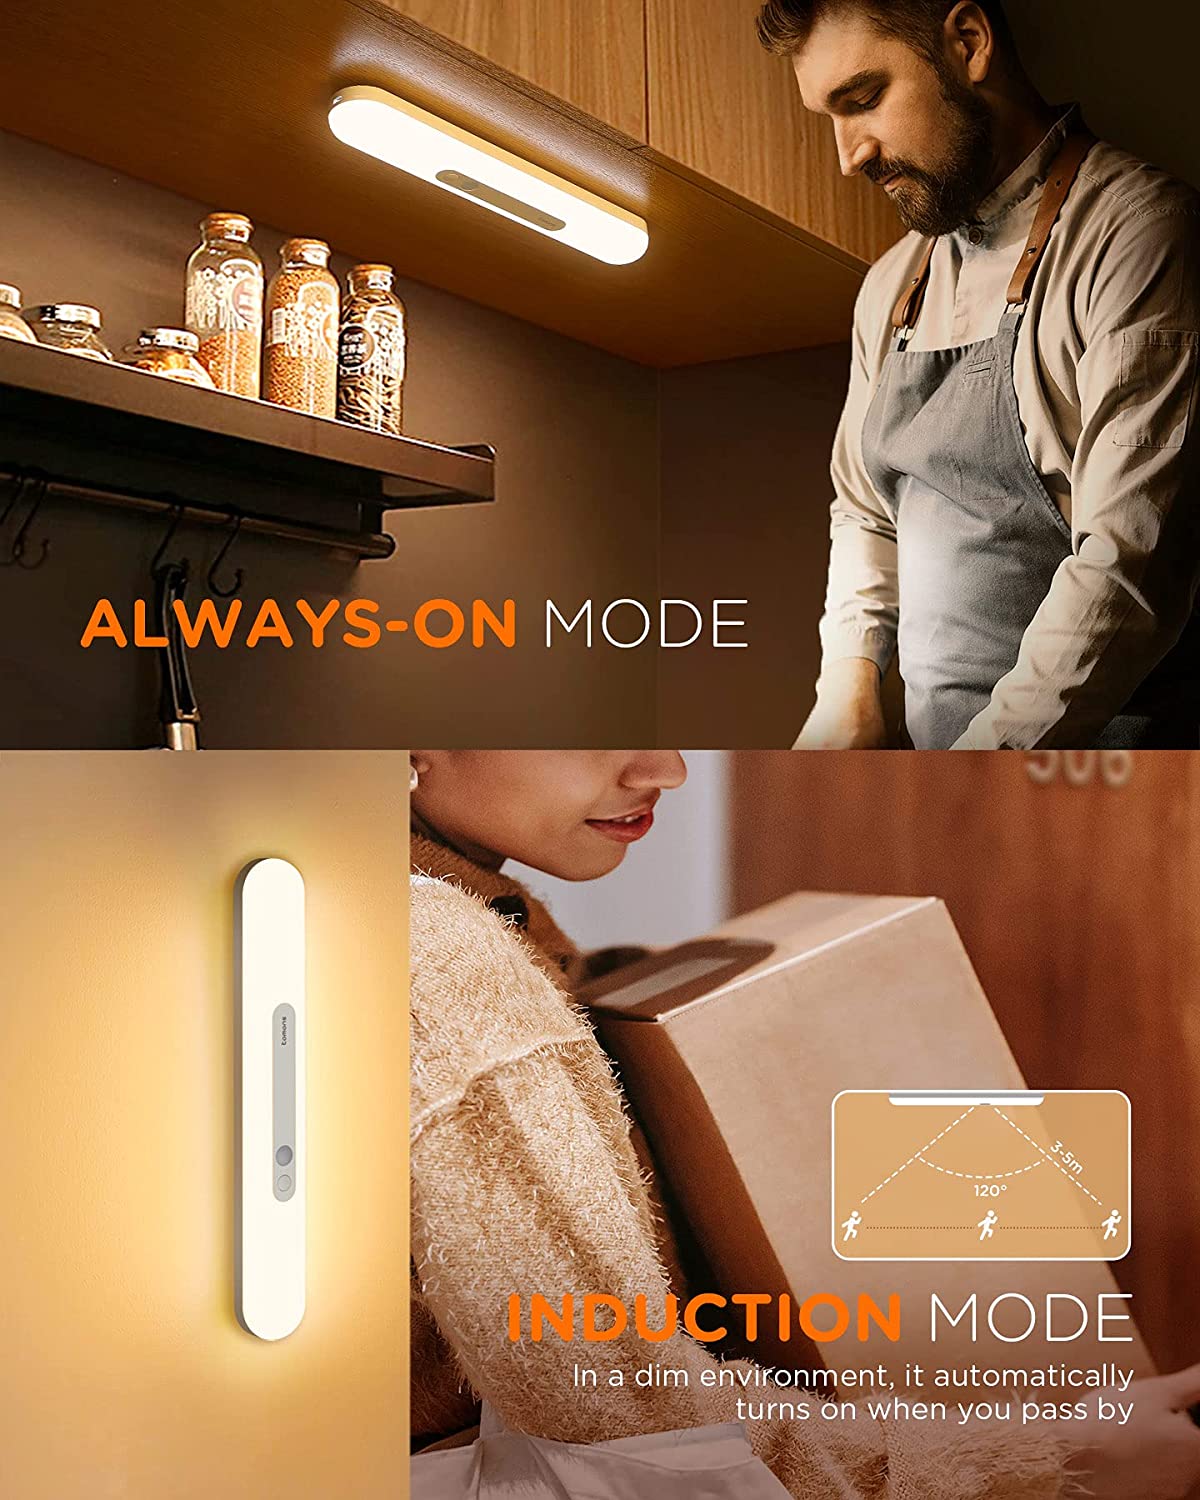 LED-Lighting-Cabinet-Lights-Motion-Sensor-Kitchen-Light-Wireless-USB-Rechargeable-Stick-on-Magnetic-Night-Lighting-for-Closet-Hallway-Bedroom-Mother-s-Day-Gift-21